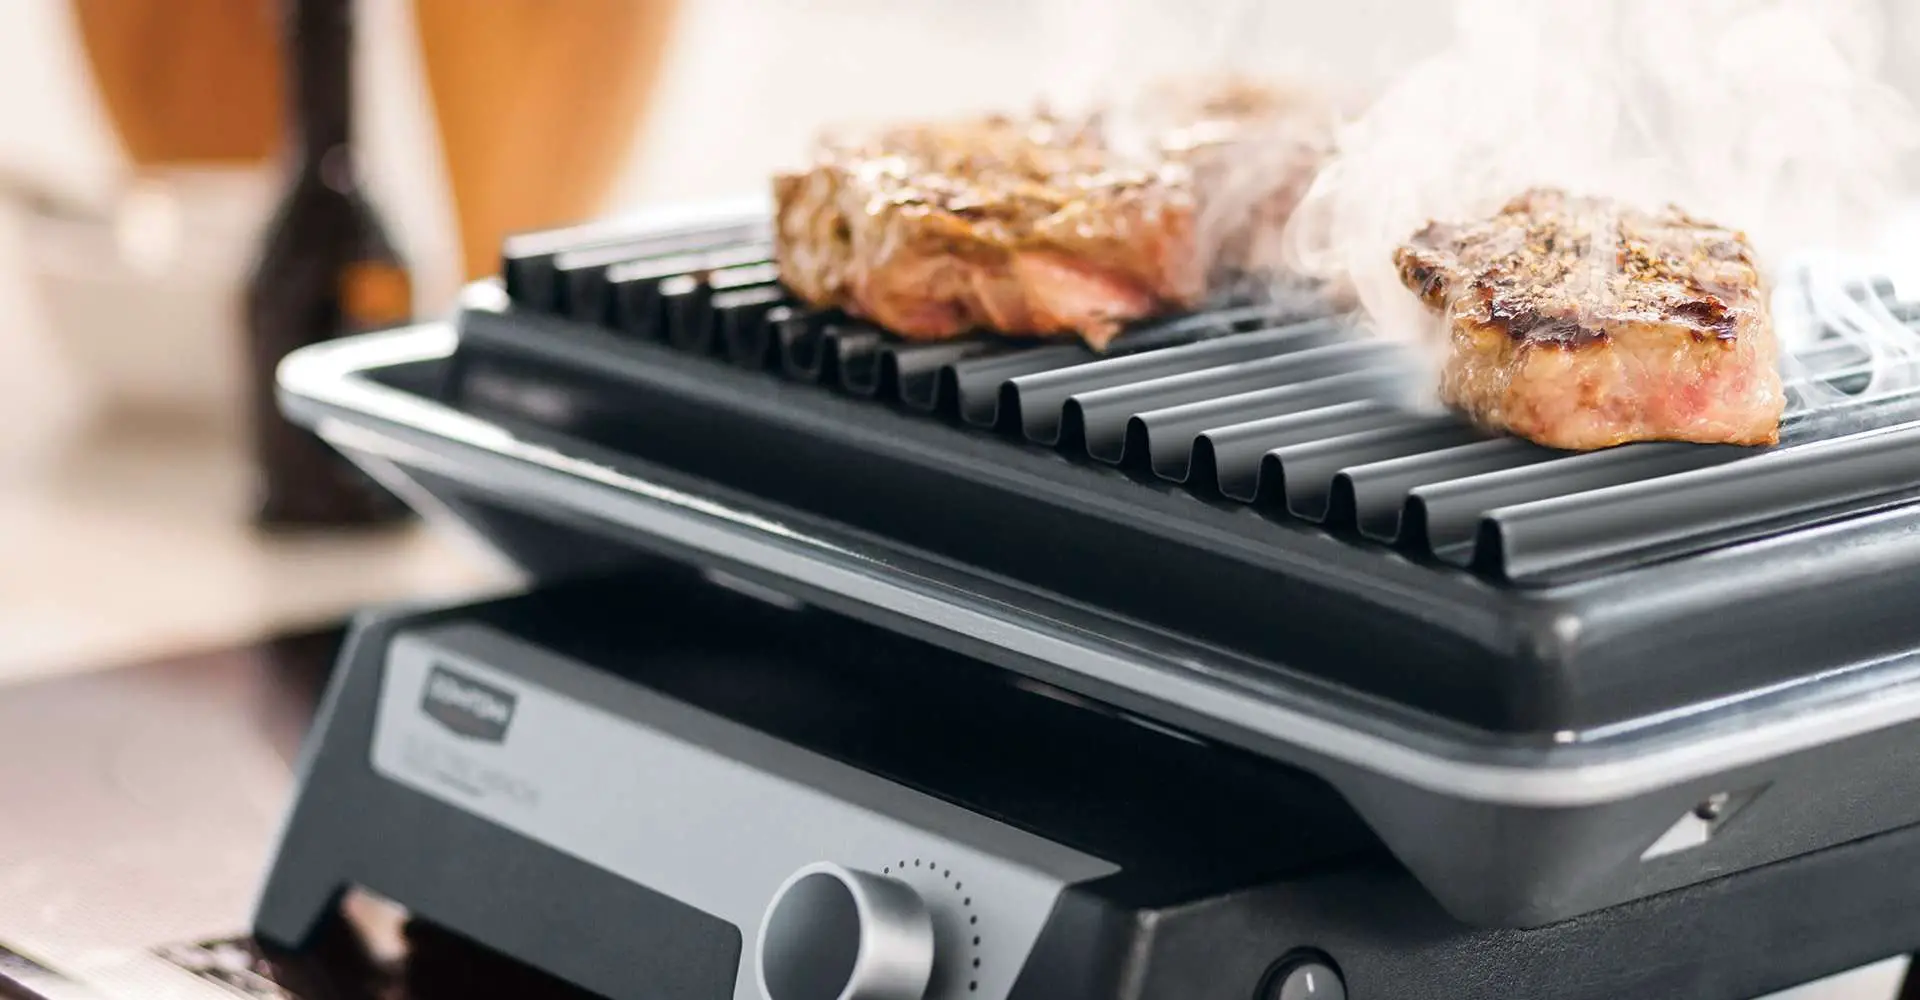 The main information about electric grills